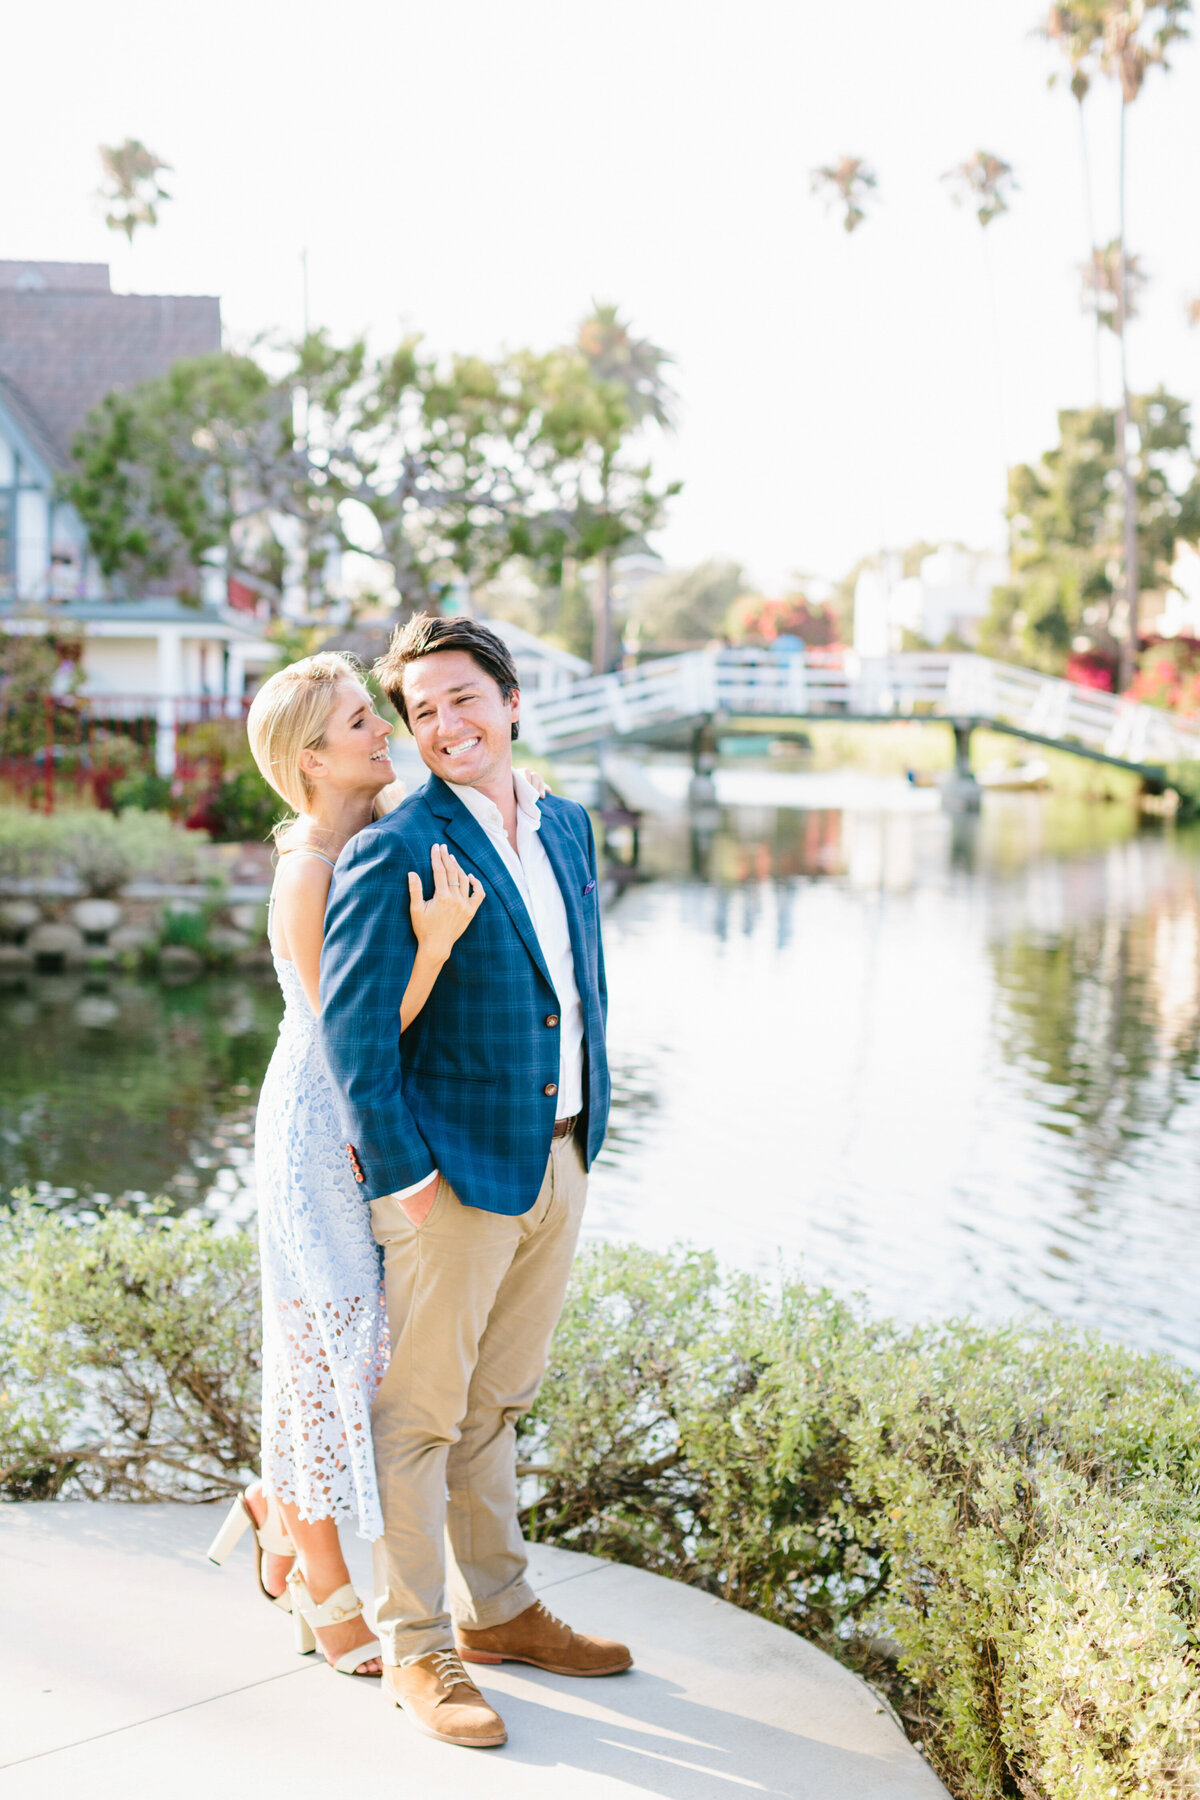 Best California and Texas Engagement Photographer-Jodee Debes Photography-251